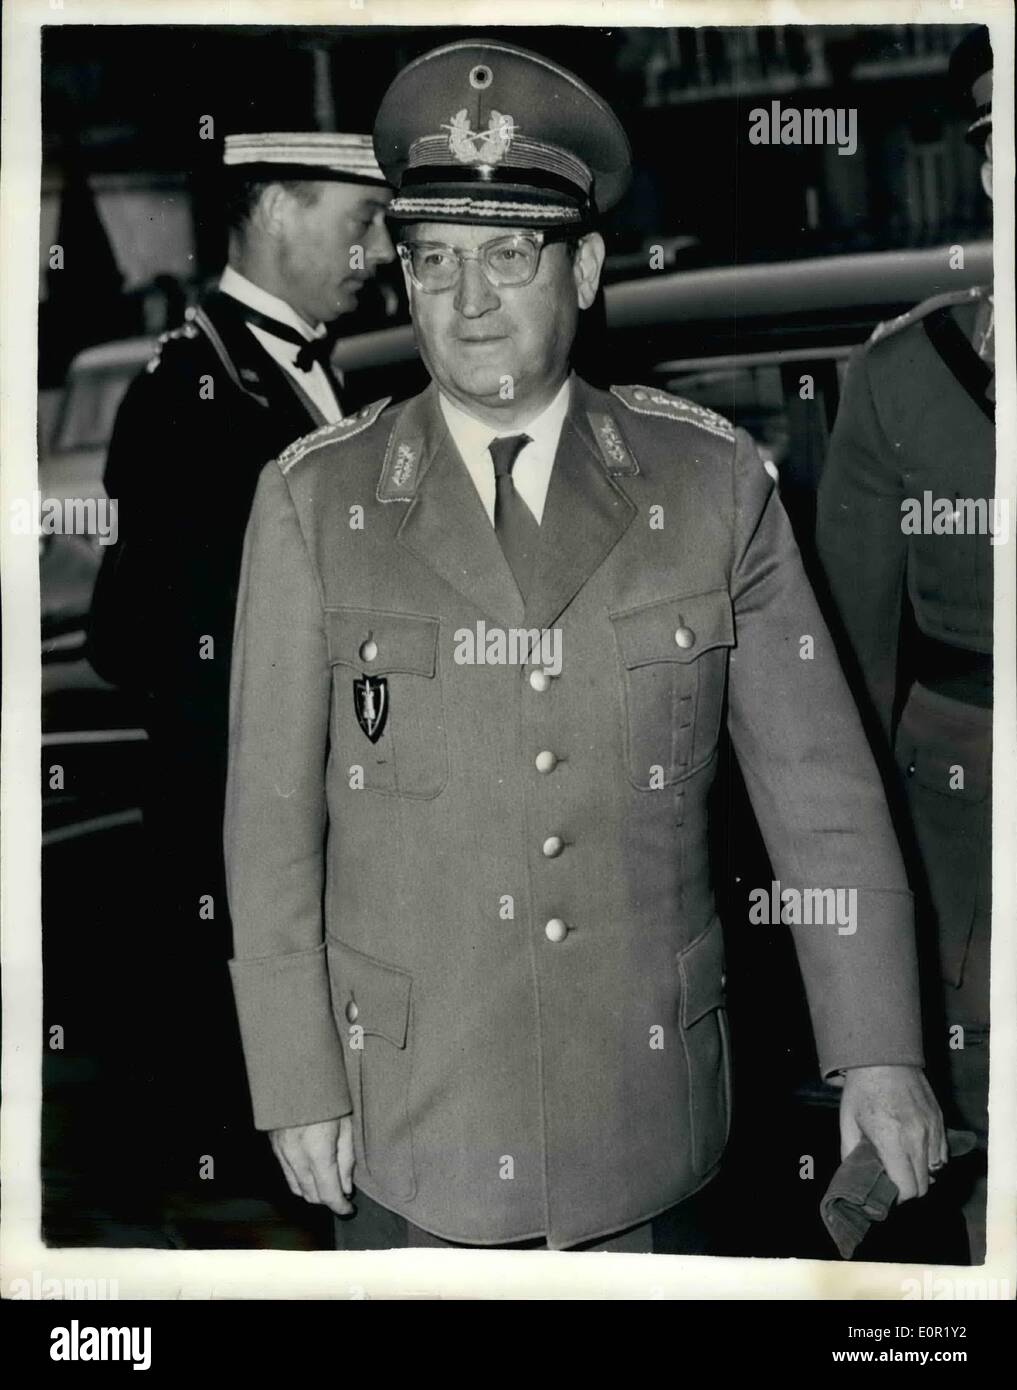 Sep. 09, 1957 - General Speidel in London; General Hans Speidel, NATO C in C, Land Forces, Central Europe, arrived in London yesterday for a four day visit to Britain. Photo Shows General Speidel arriving at his Hotel in London yesterday. Stock Photo